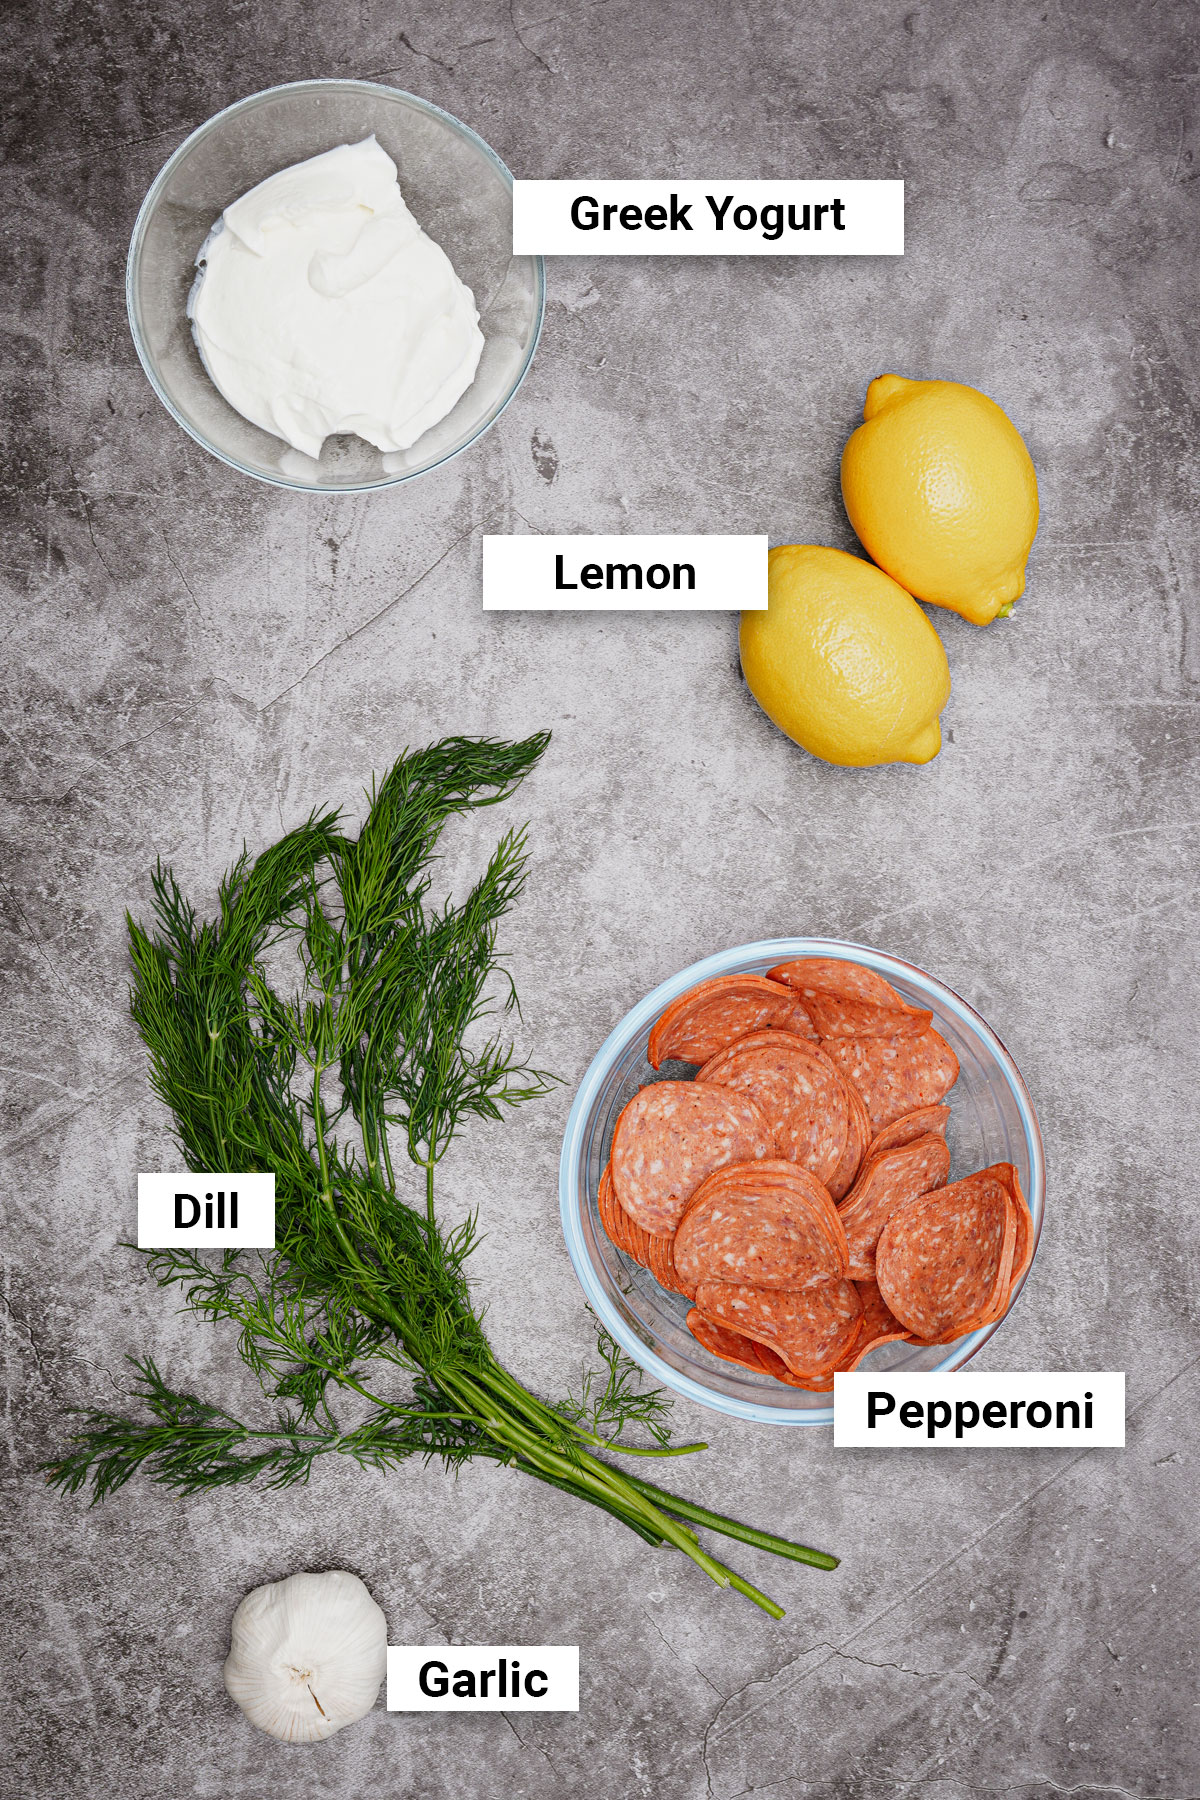 Ingredients for pepperoni crisps air fryer recipe with dill yogurt dip